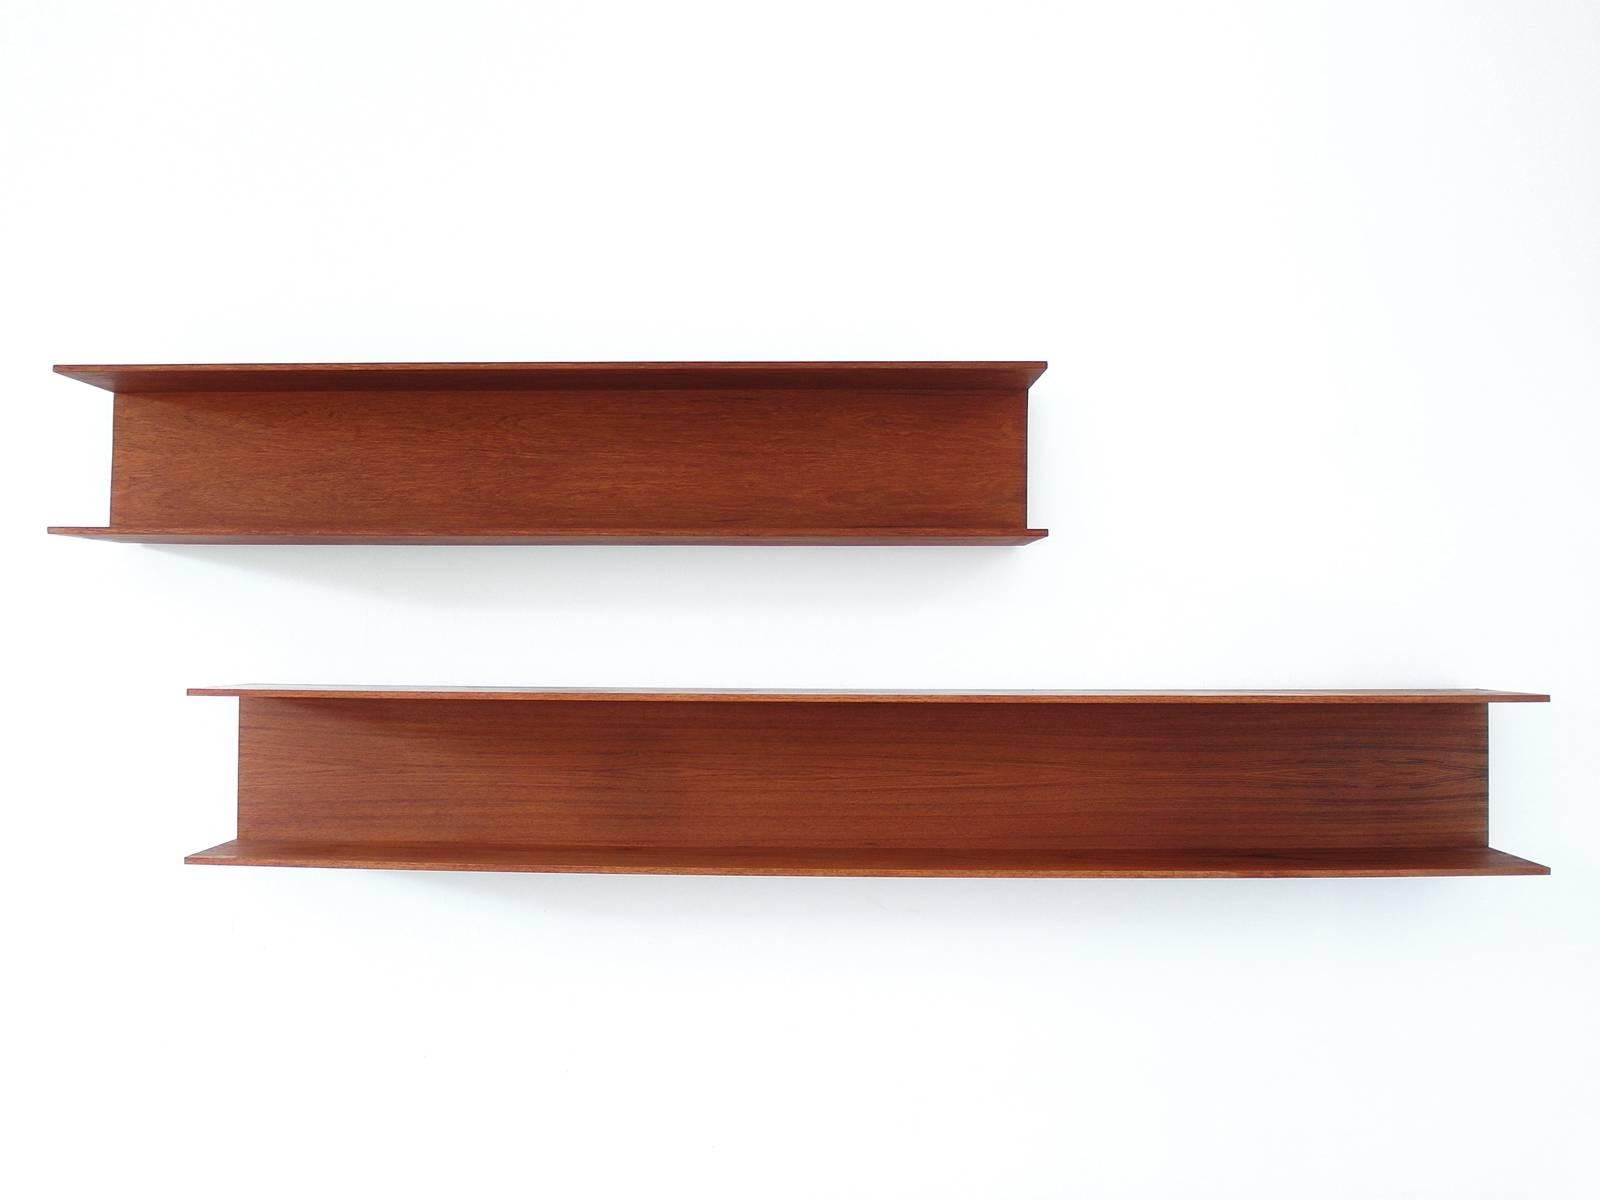 A Minimalist pair of teak shelves from the Mid-Century Modern design collection curated by Visavu. Designed by Walter Wirz for Wilhelm Renz in 1964. The shelves are 150 cm and 200 cm in width. 
German modernist design, simple and light. The shelves